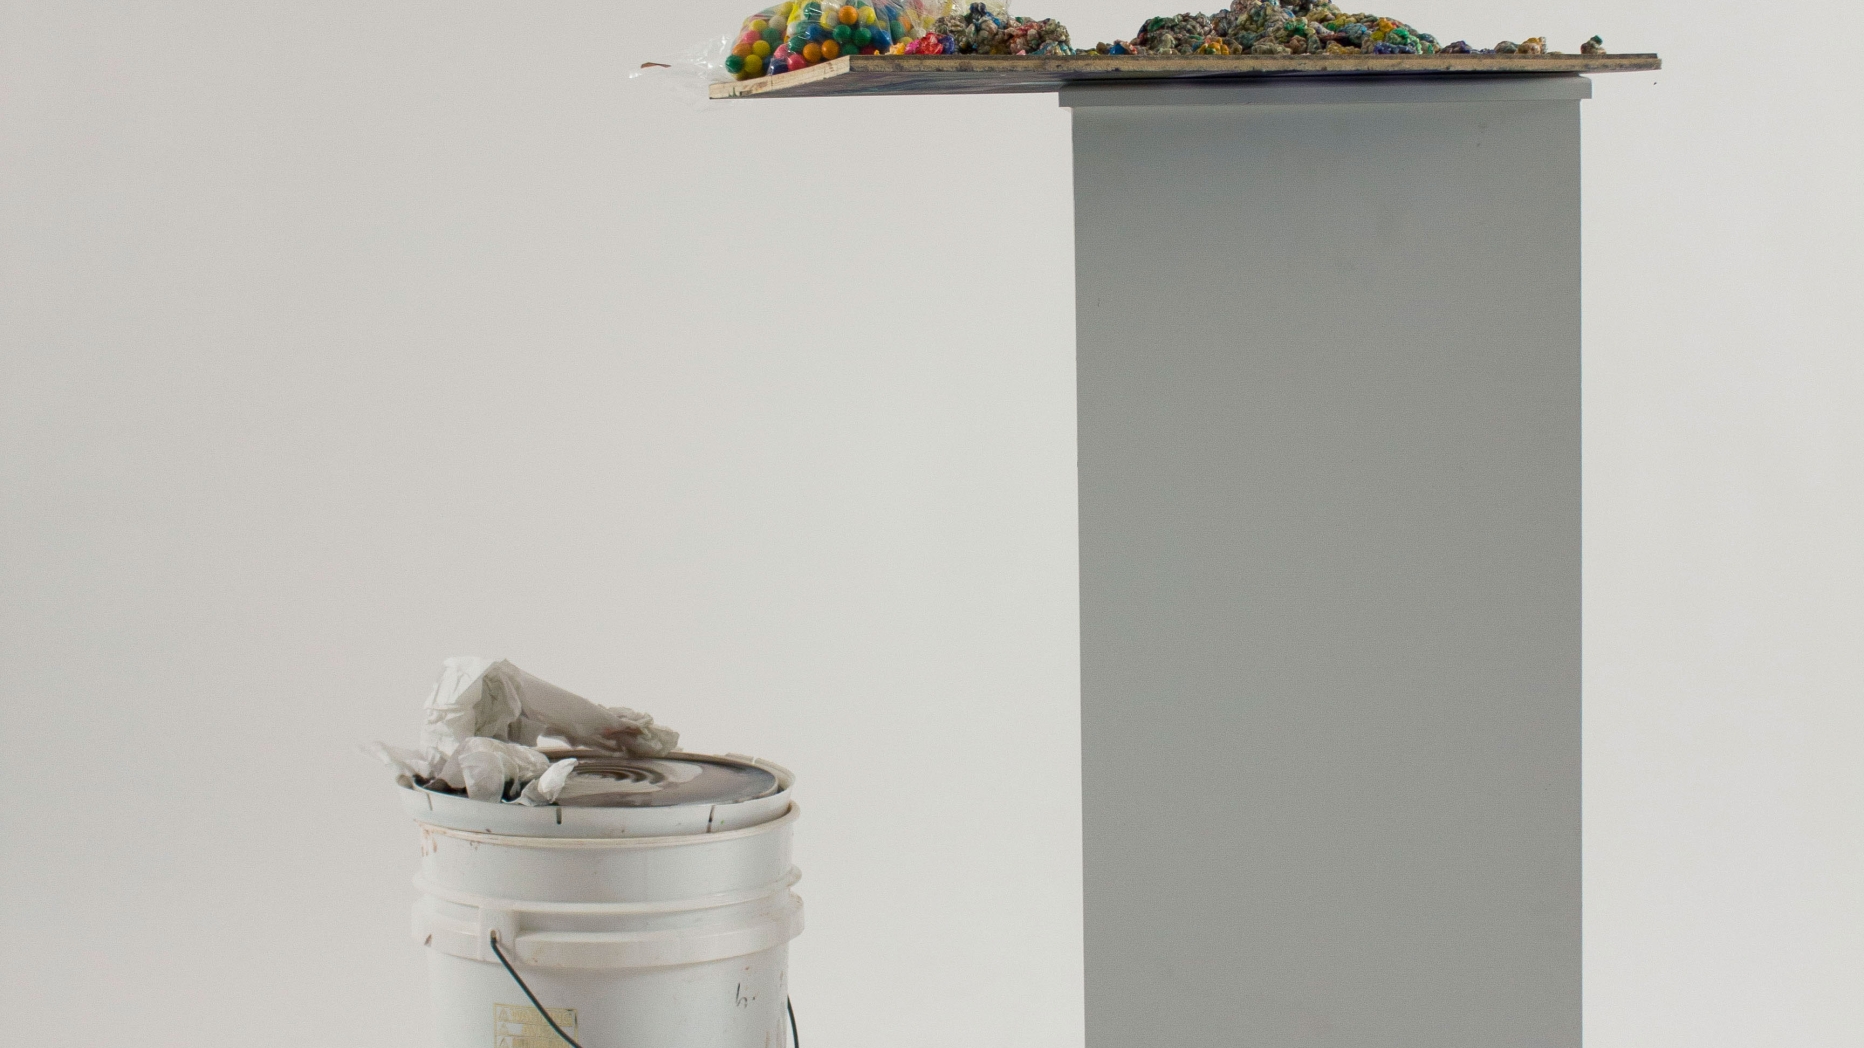 Art piece utilizing various items on a pedestal and a bucket.